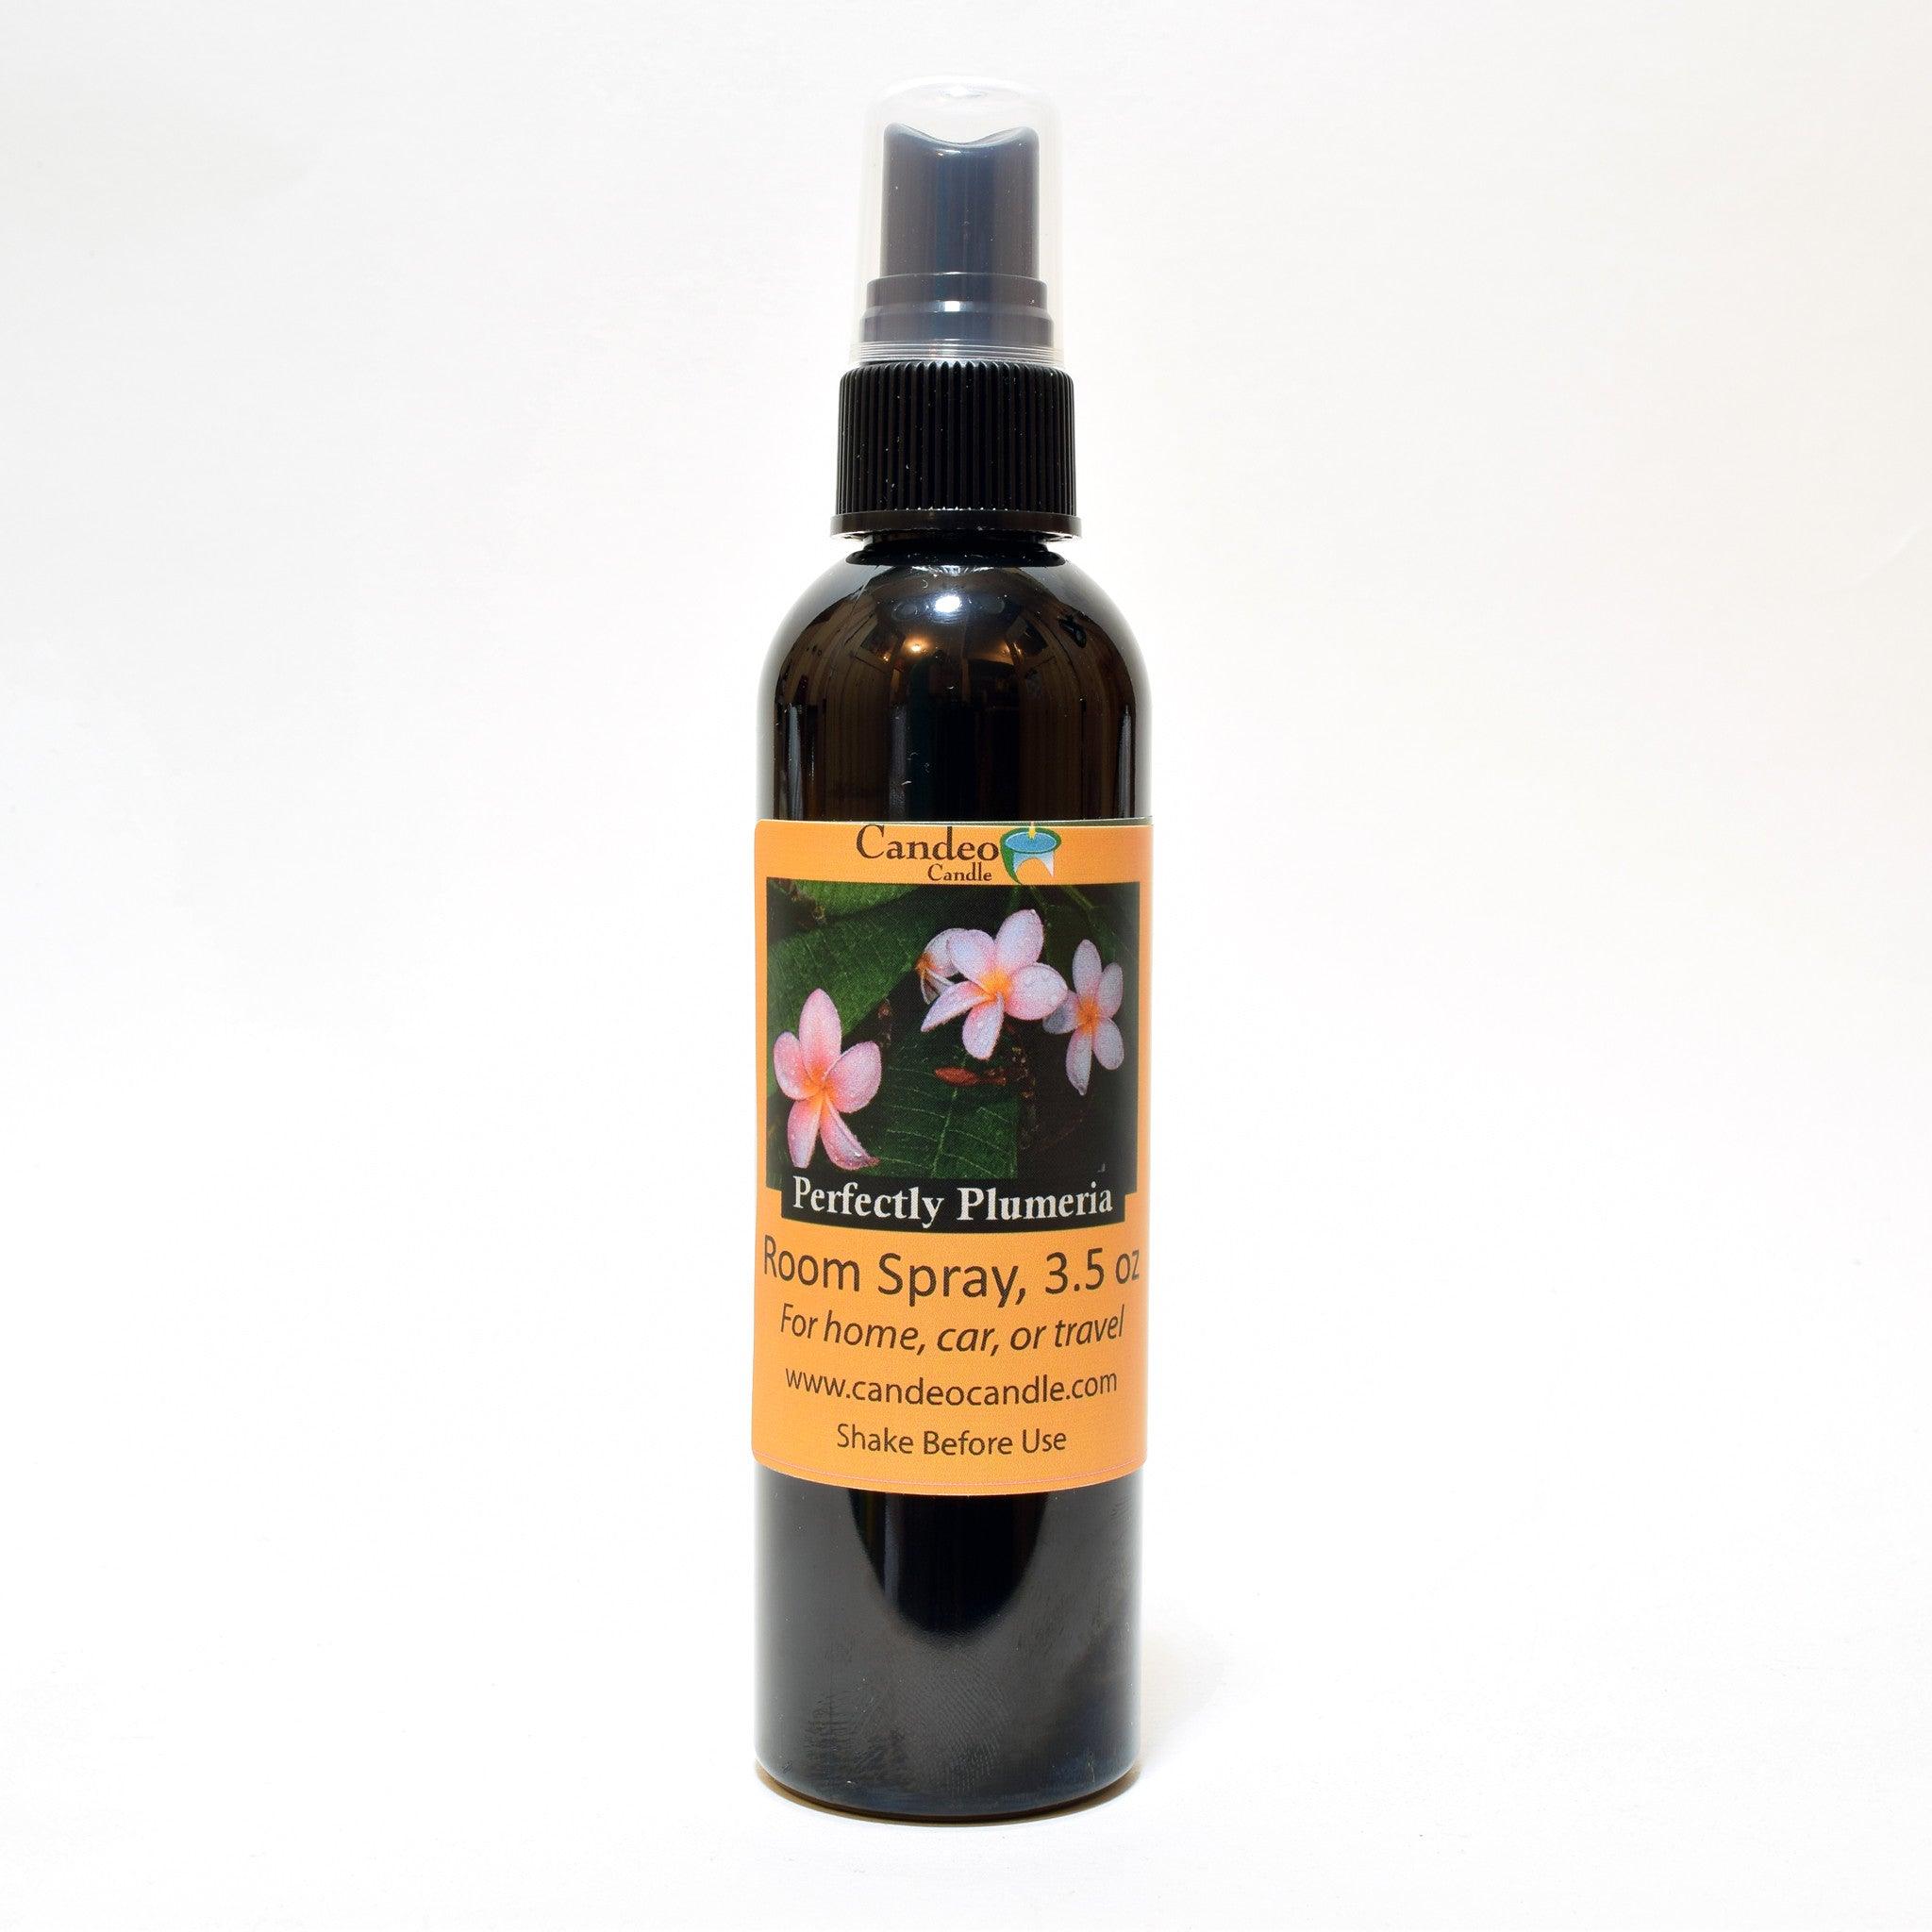 Perfectly Plumeria, 3.5 oz Room Spray - Candeo Candle